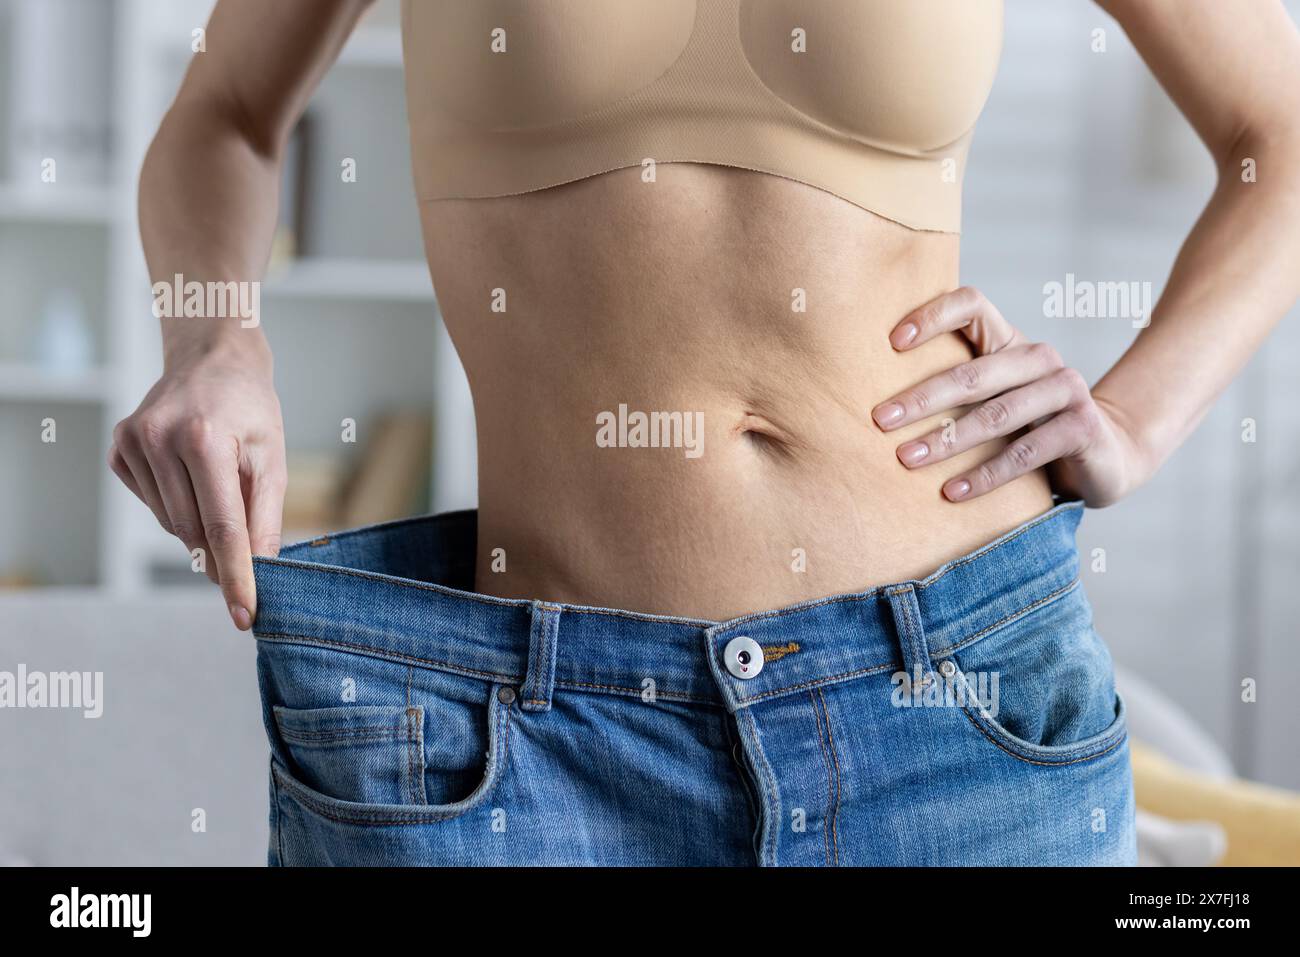 Close-up photo of female body part, thin waist, wearing wide jeans and showing result of weight loss, sport and diet. Stock Photo